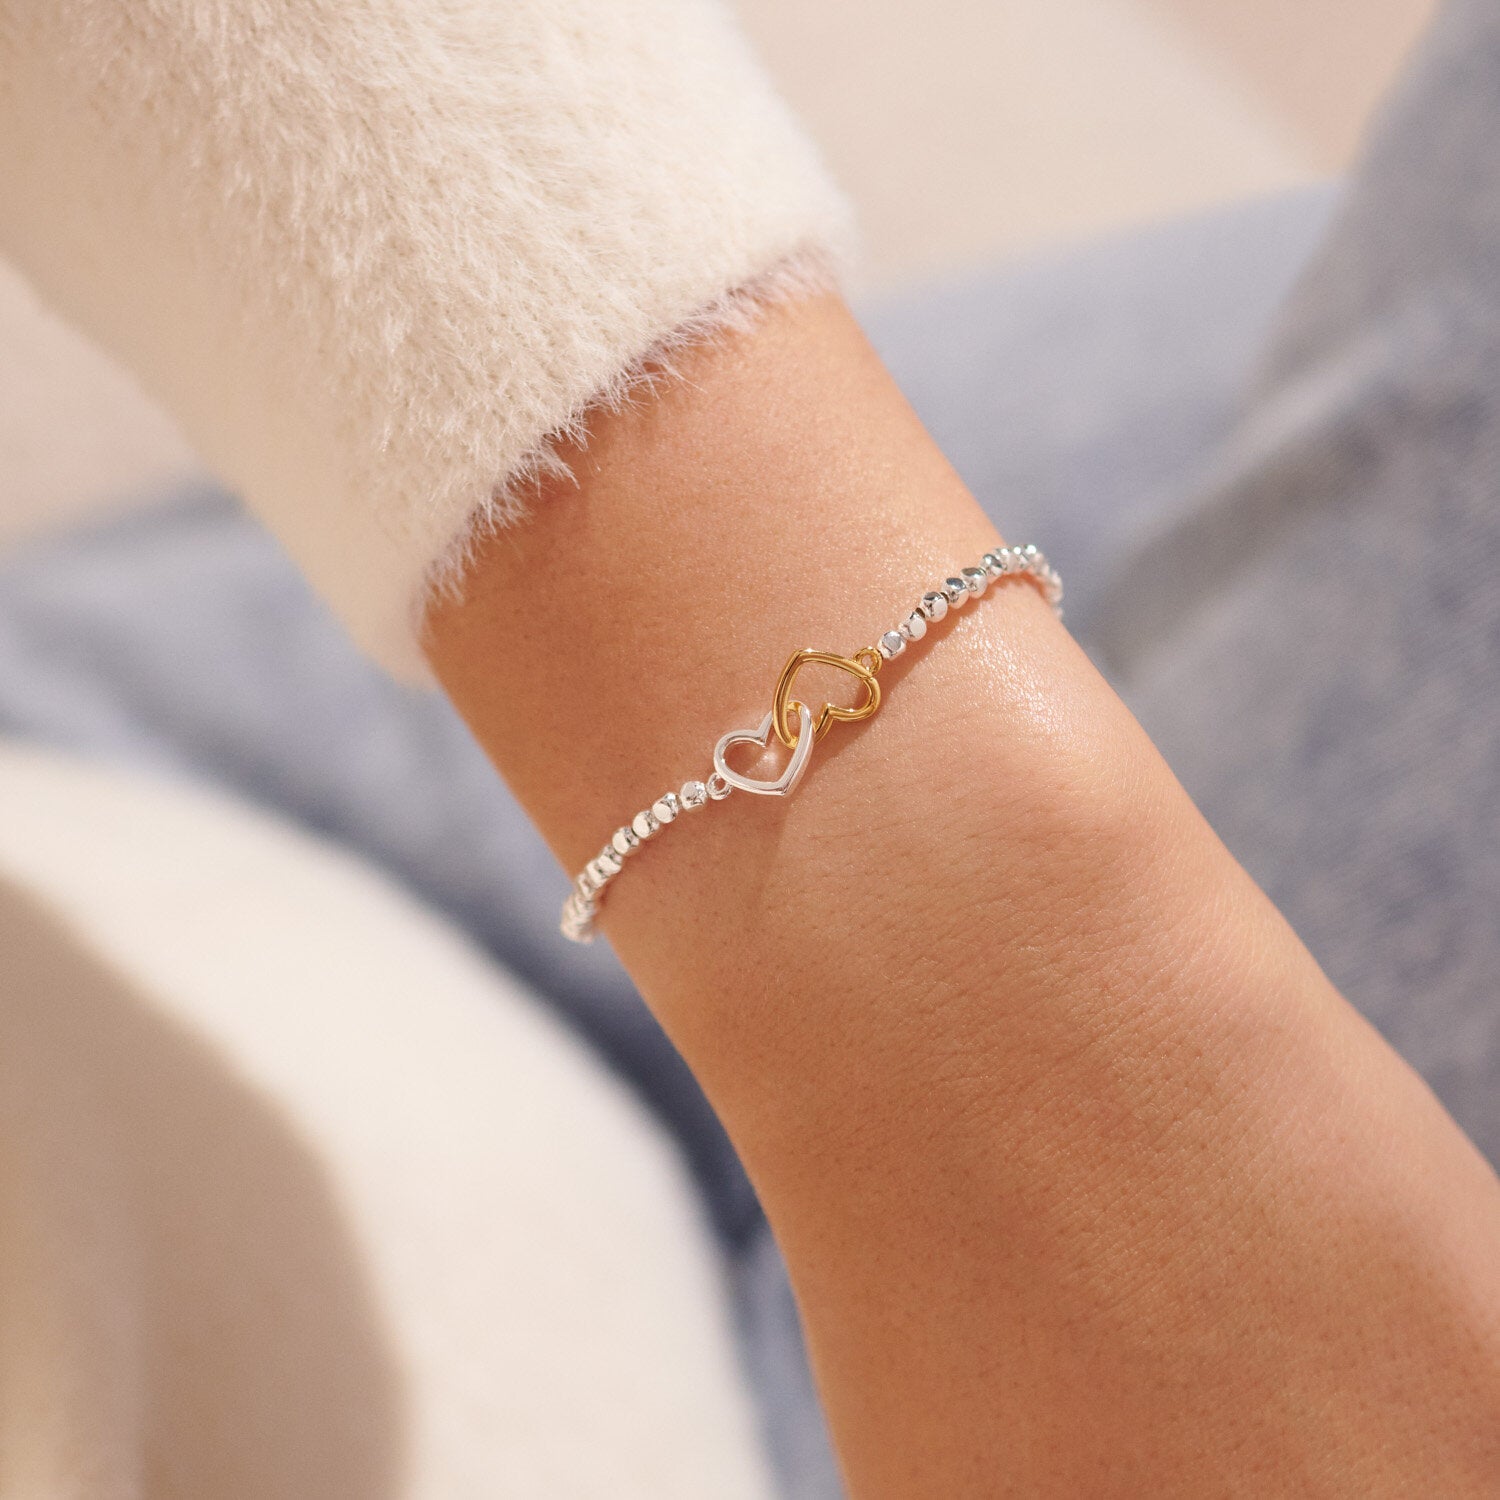 Forever Yours Bracelet - You Have A Heart Of Gold - Joma Jewellery